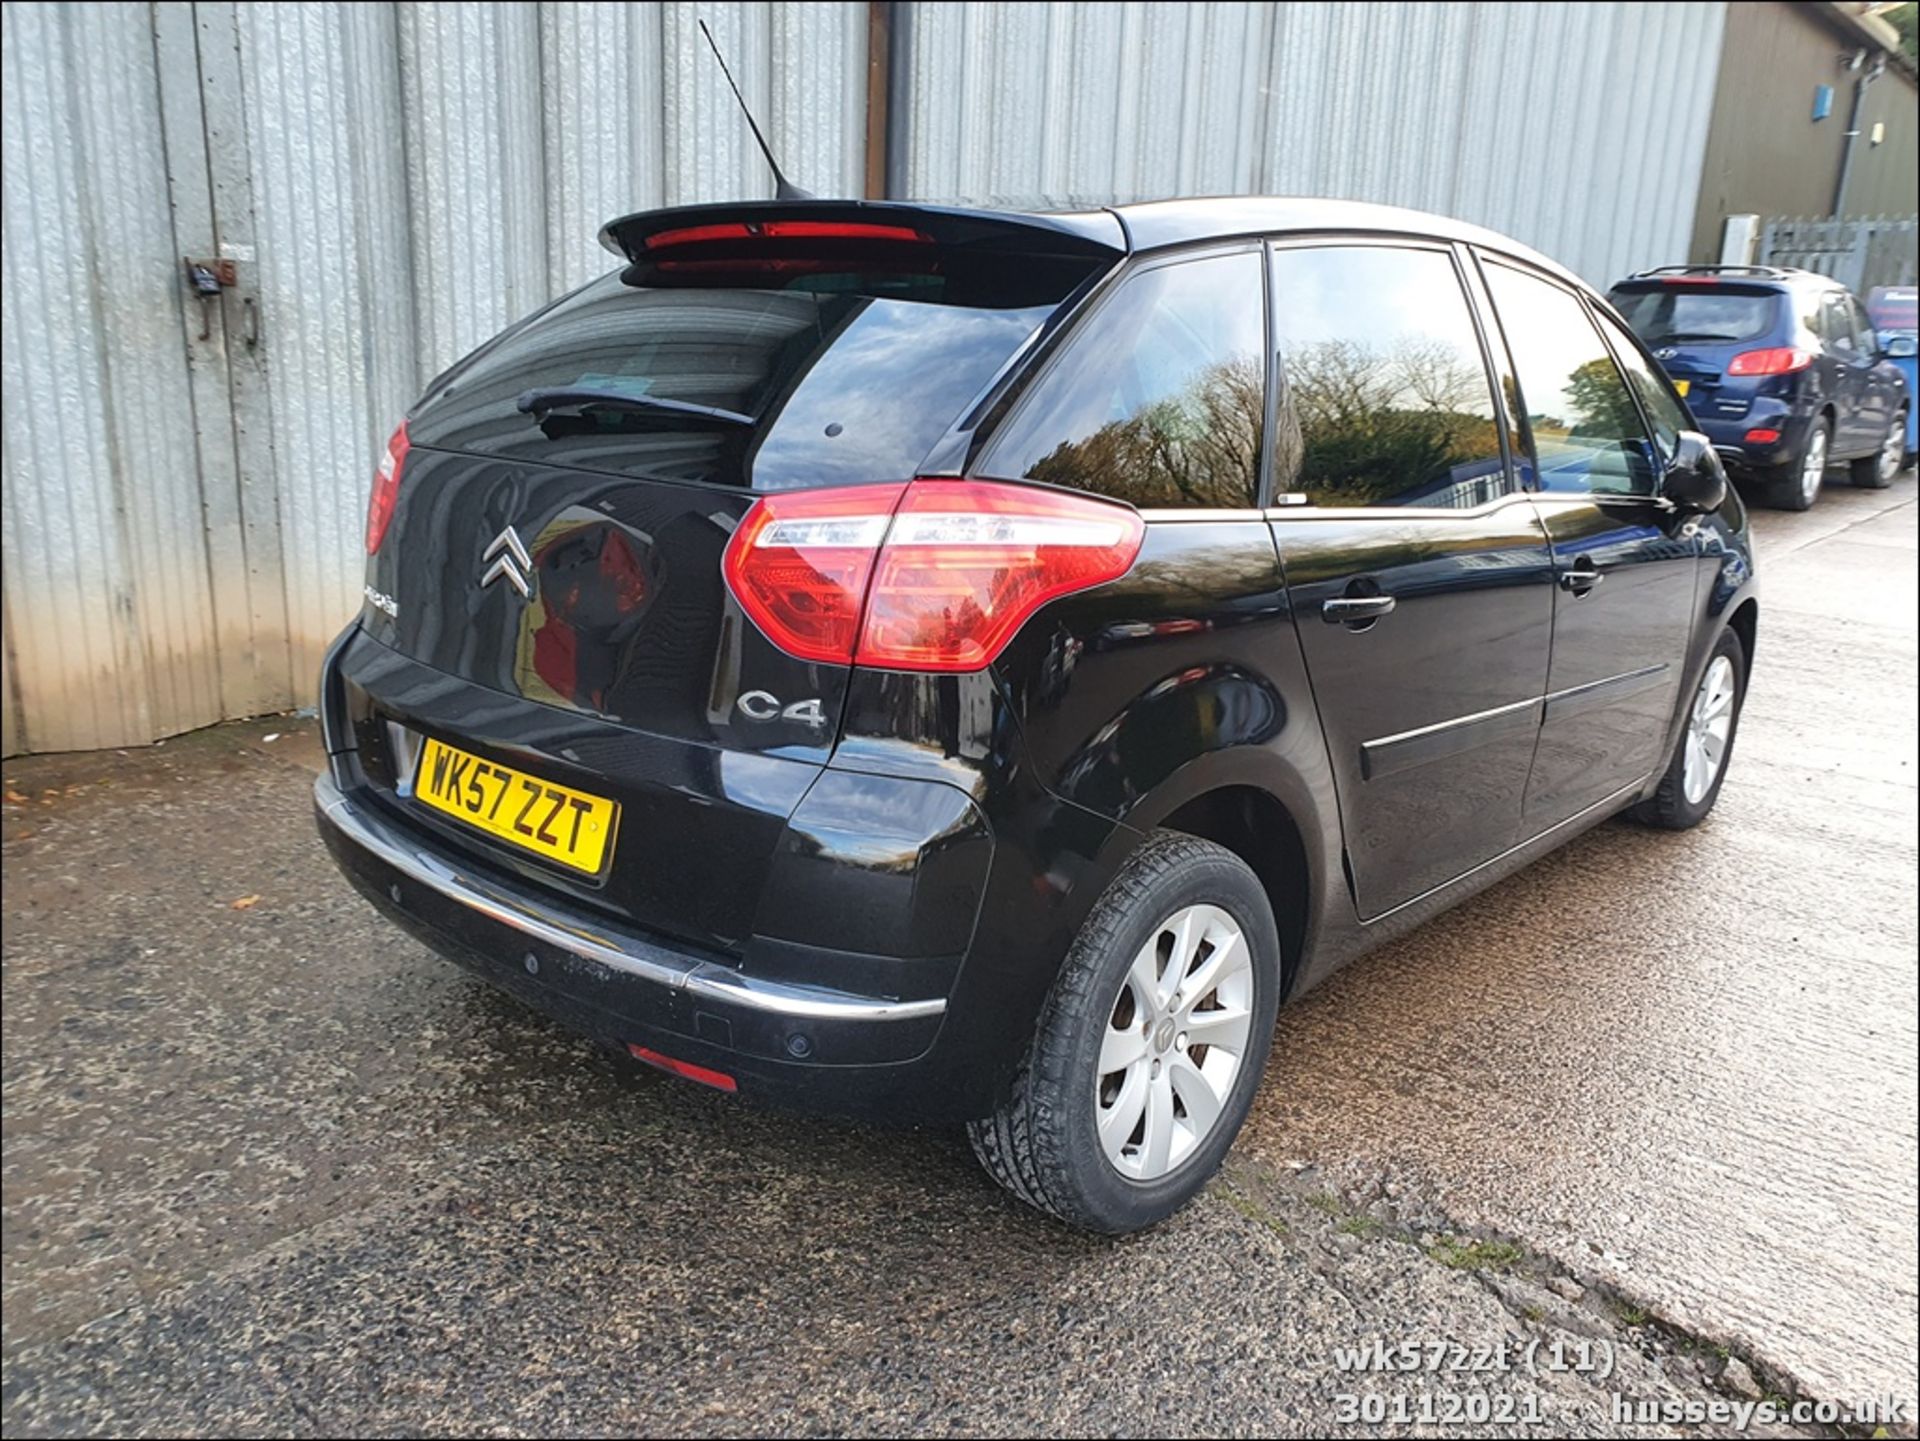 07/57 CITROEN C4 PICASSO 5 EXCL HDI EGS - 1560cc 5dr MPV (Black, 120k) - Image 10 of 29